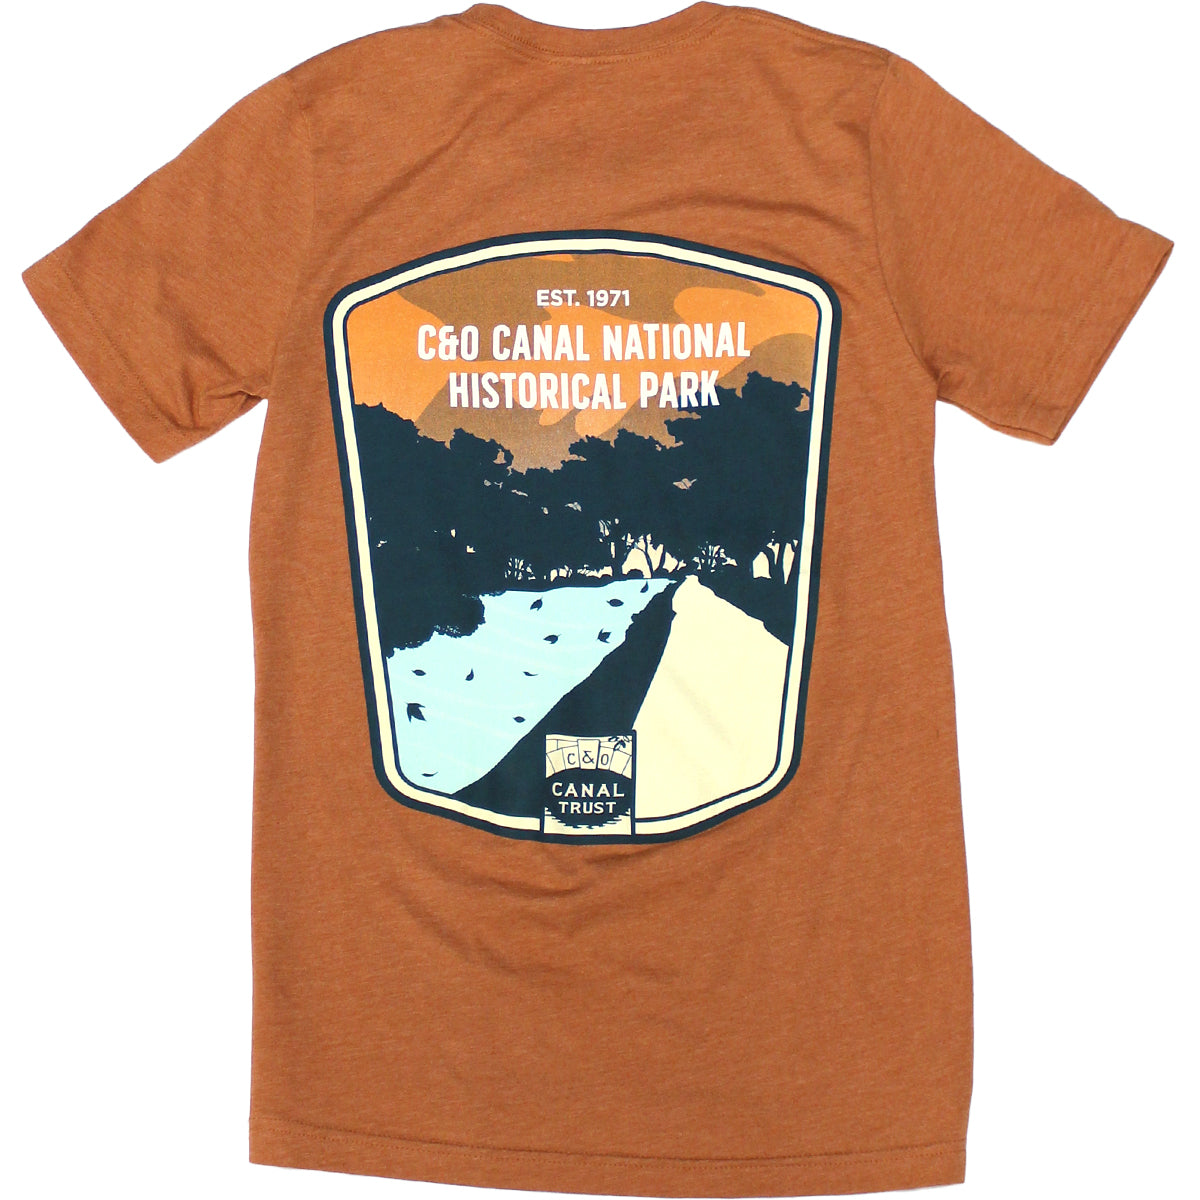 C&O Canal National Historical Park (Yam) / Shirt - Route One Apparel